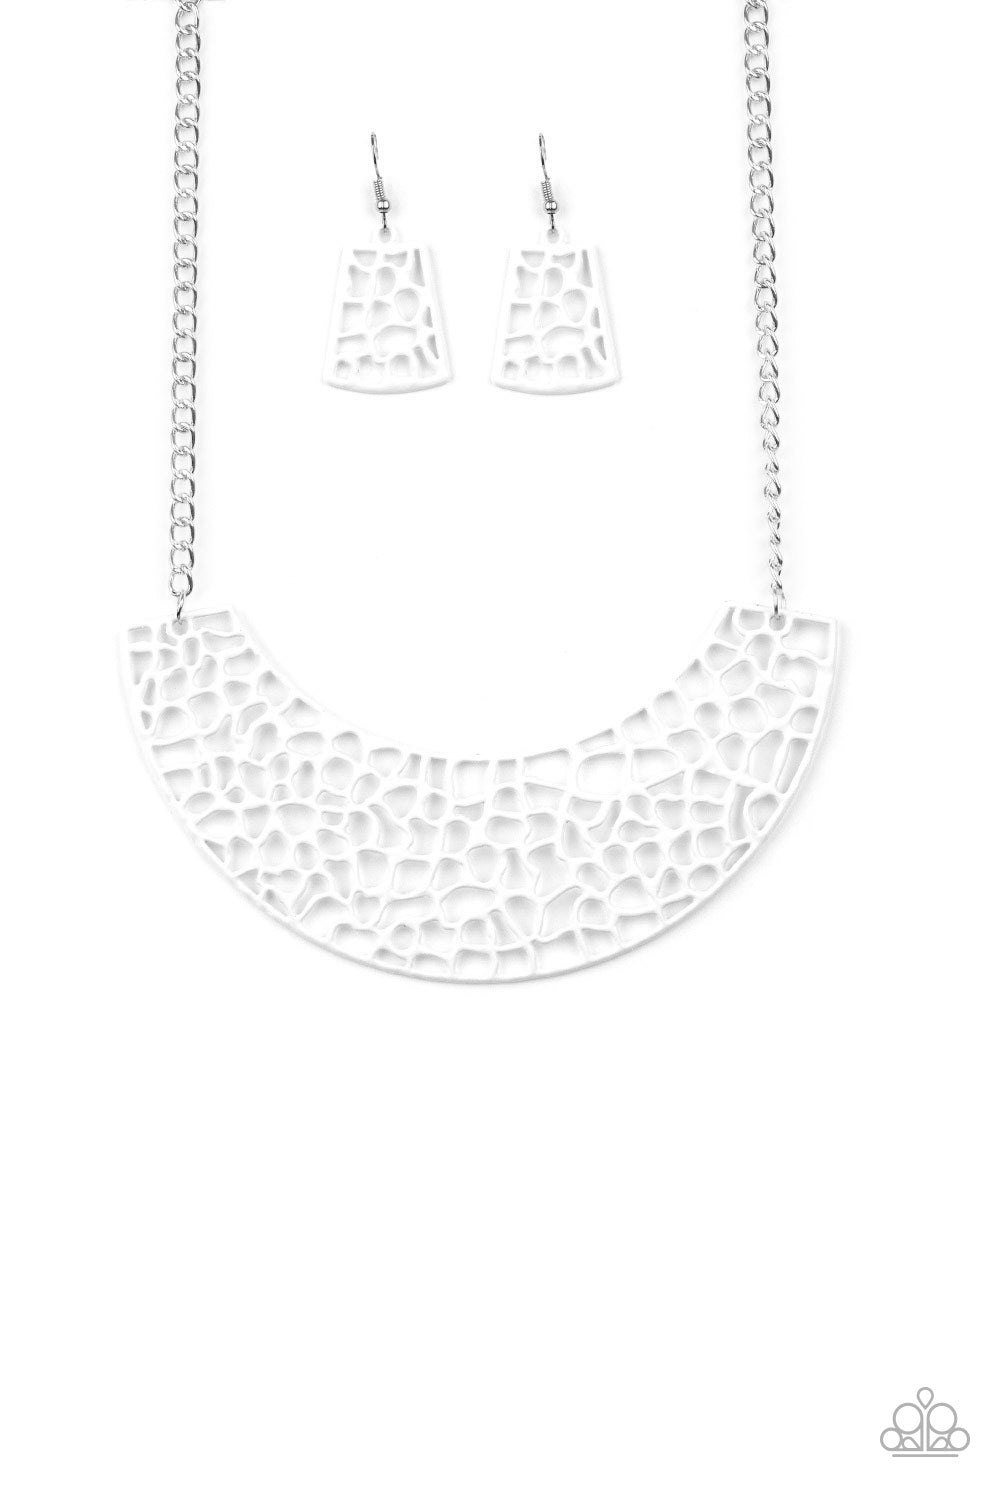 Paparazzi Accessories Powerful Prowl - White Necklaces - Lady T Accessories